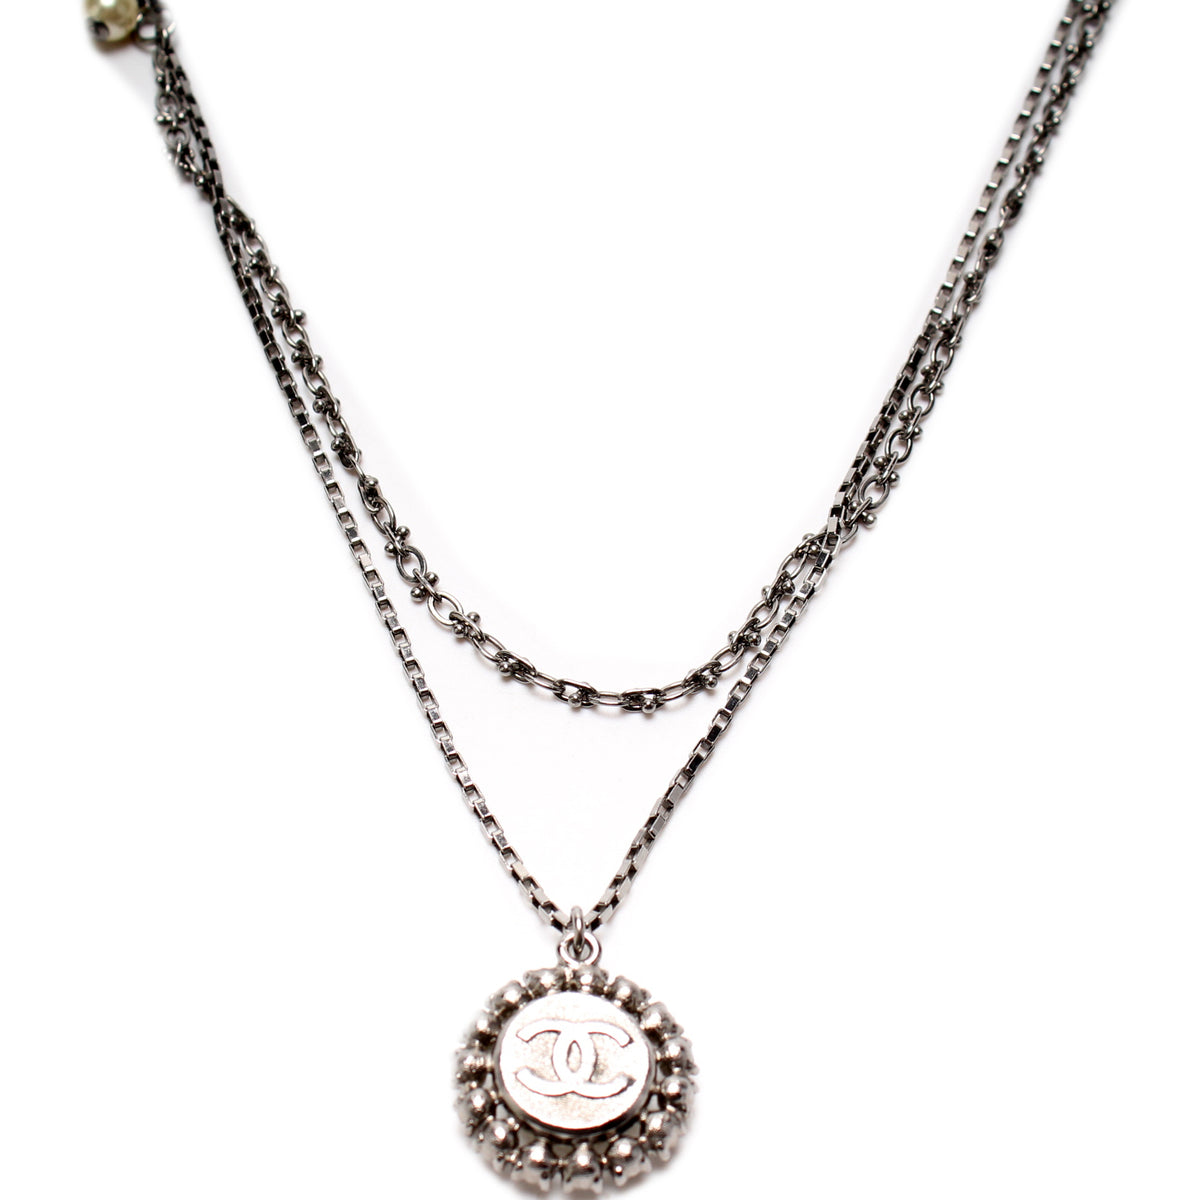 CC Pearl Rhinestone Necklace Pendant (Authentic Pre-Owned)